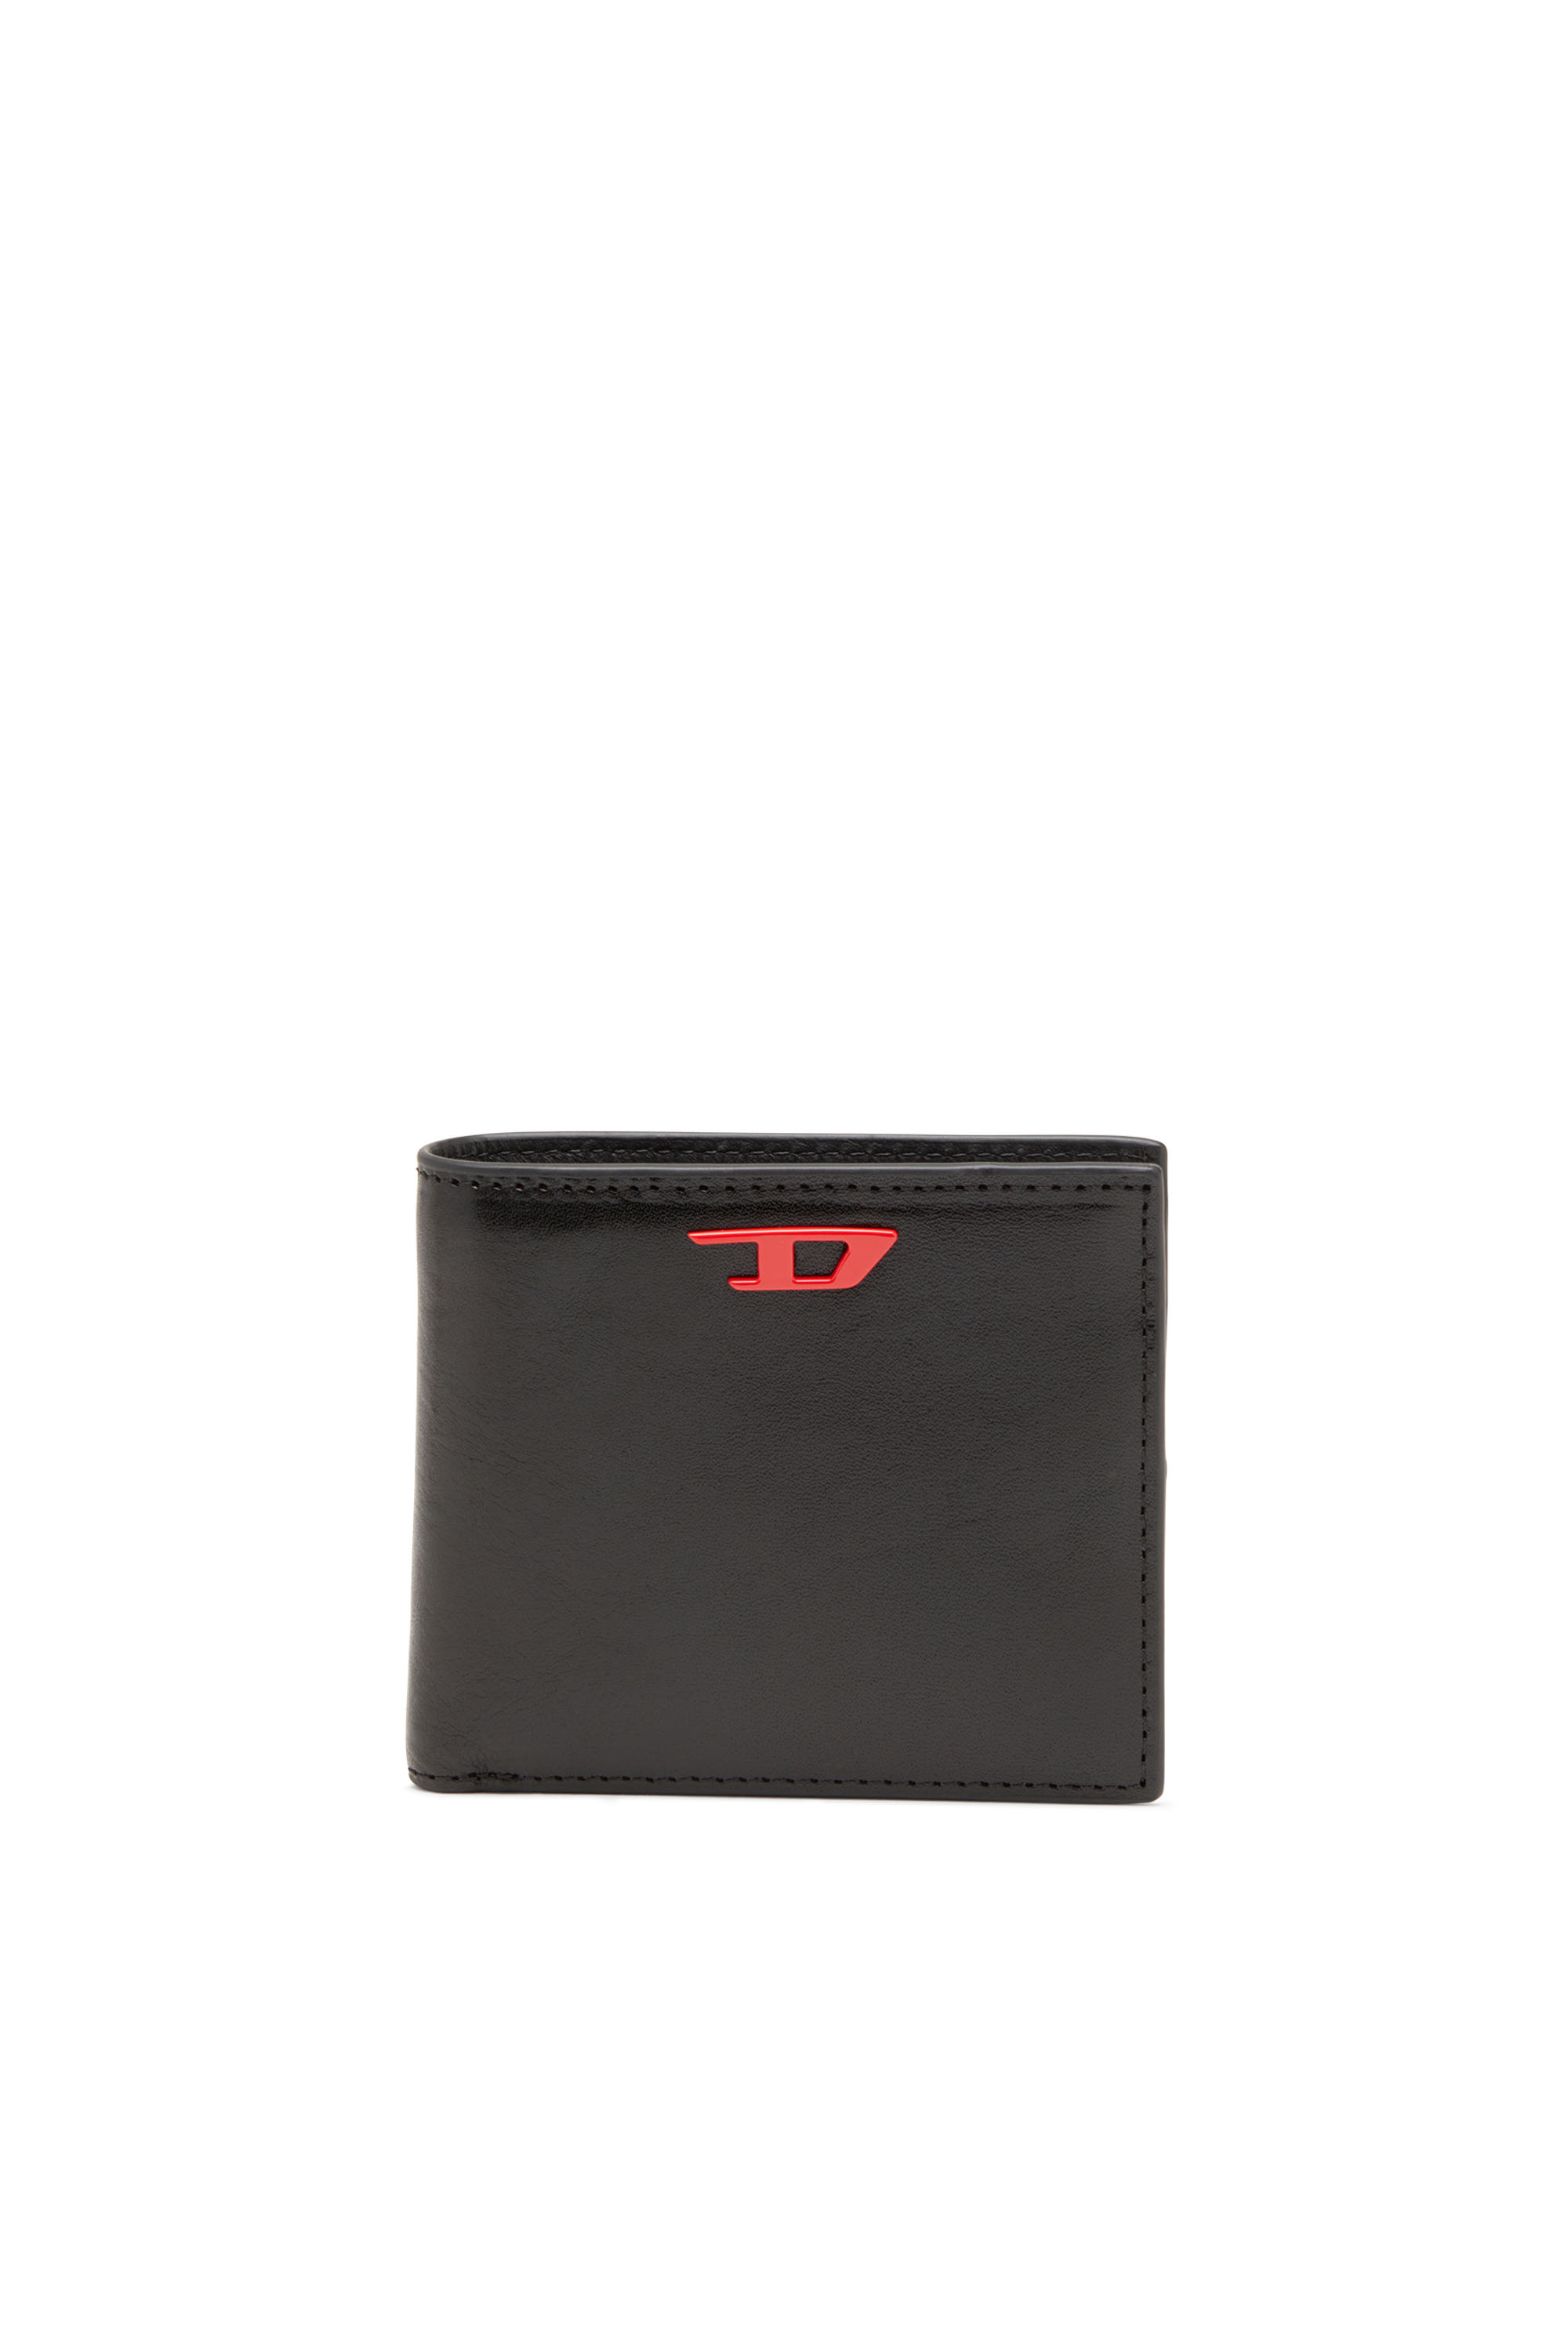 Diesel - RAVE BI-FOLD COIN S, Male Leather bi-fold wallet with red D plaque in Black - Image 1